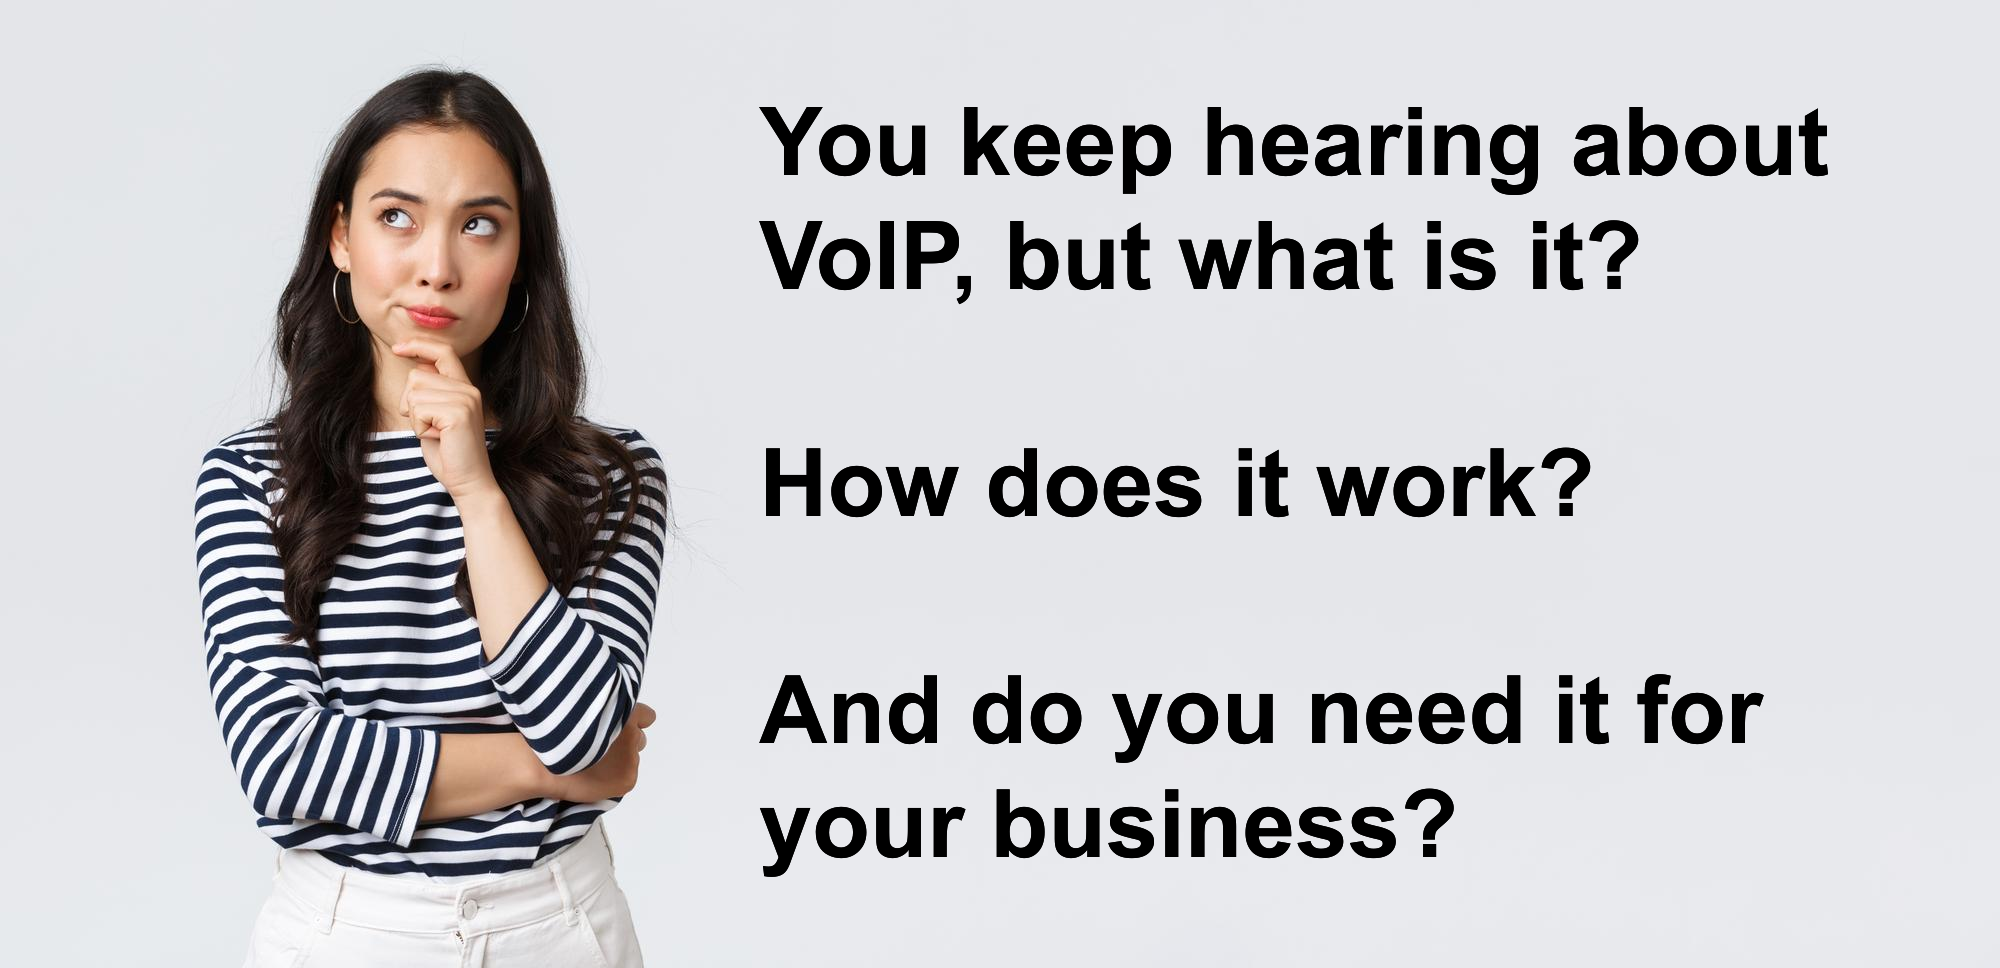 What is VoIP, how does it work and do you need it for your business?